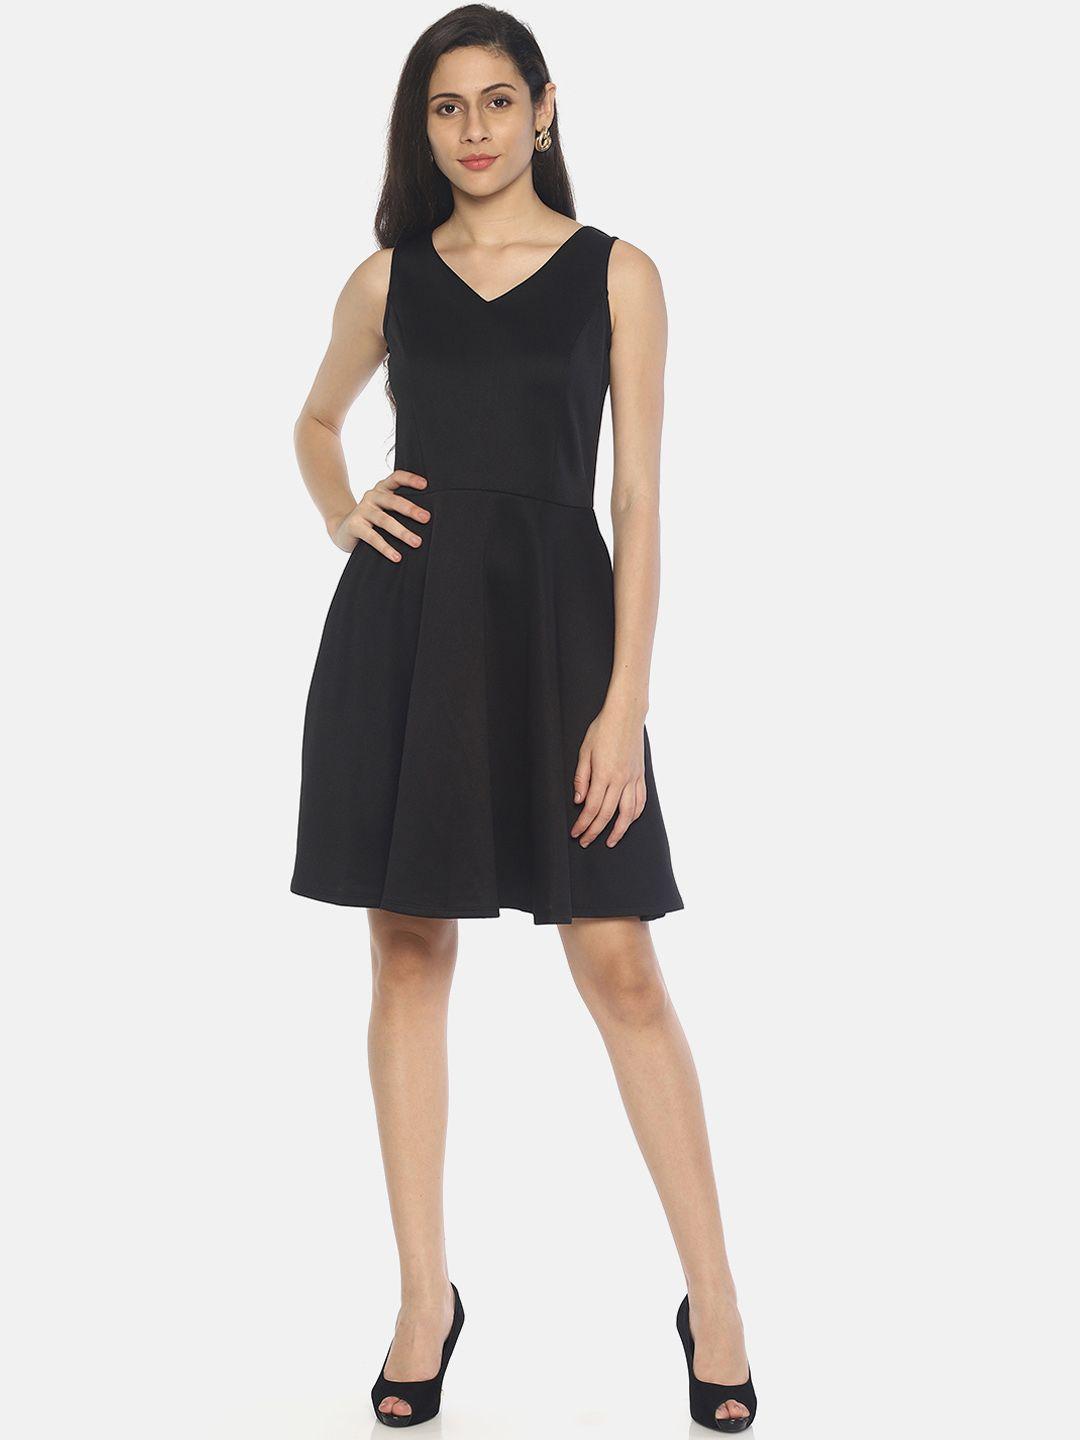 aara-women-solid-black-fit-and-flare-dress